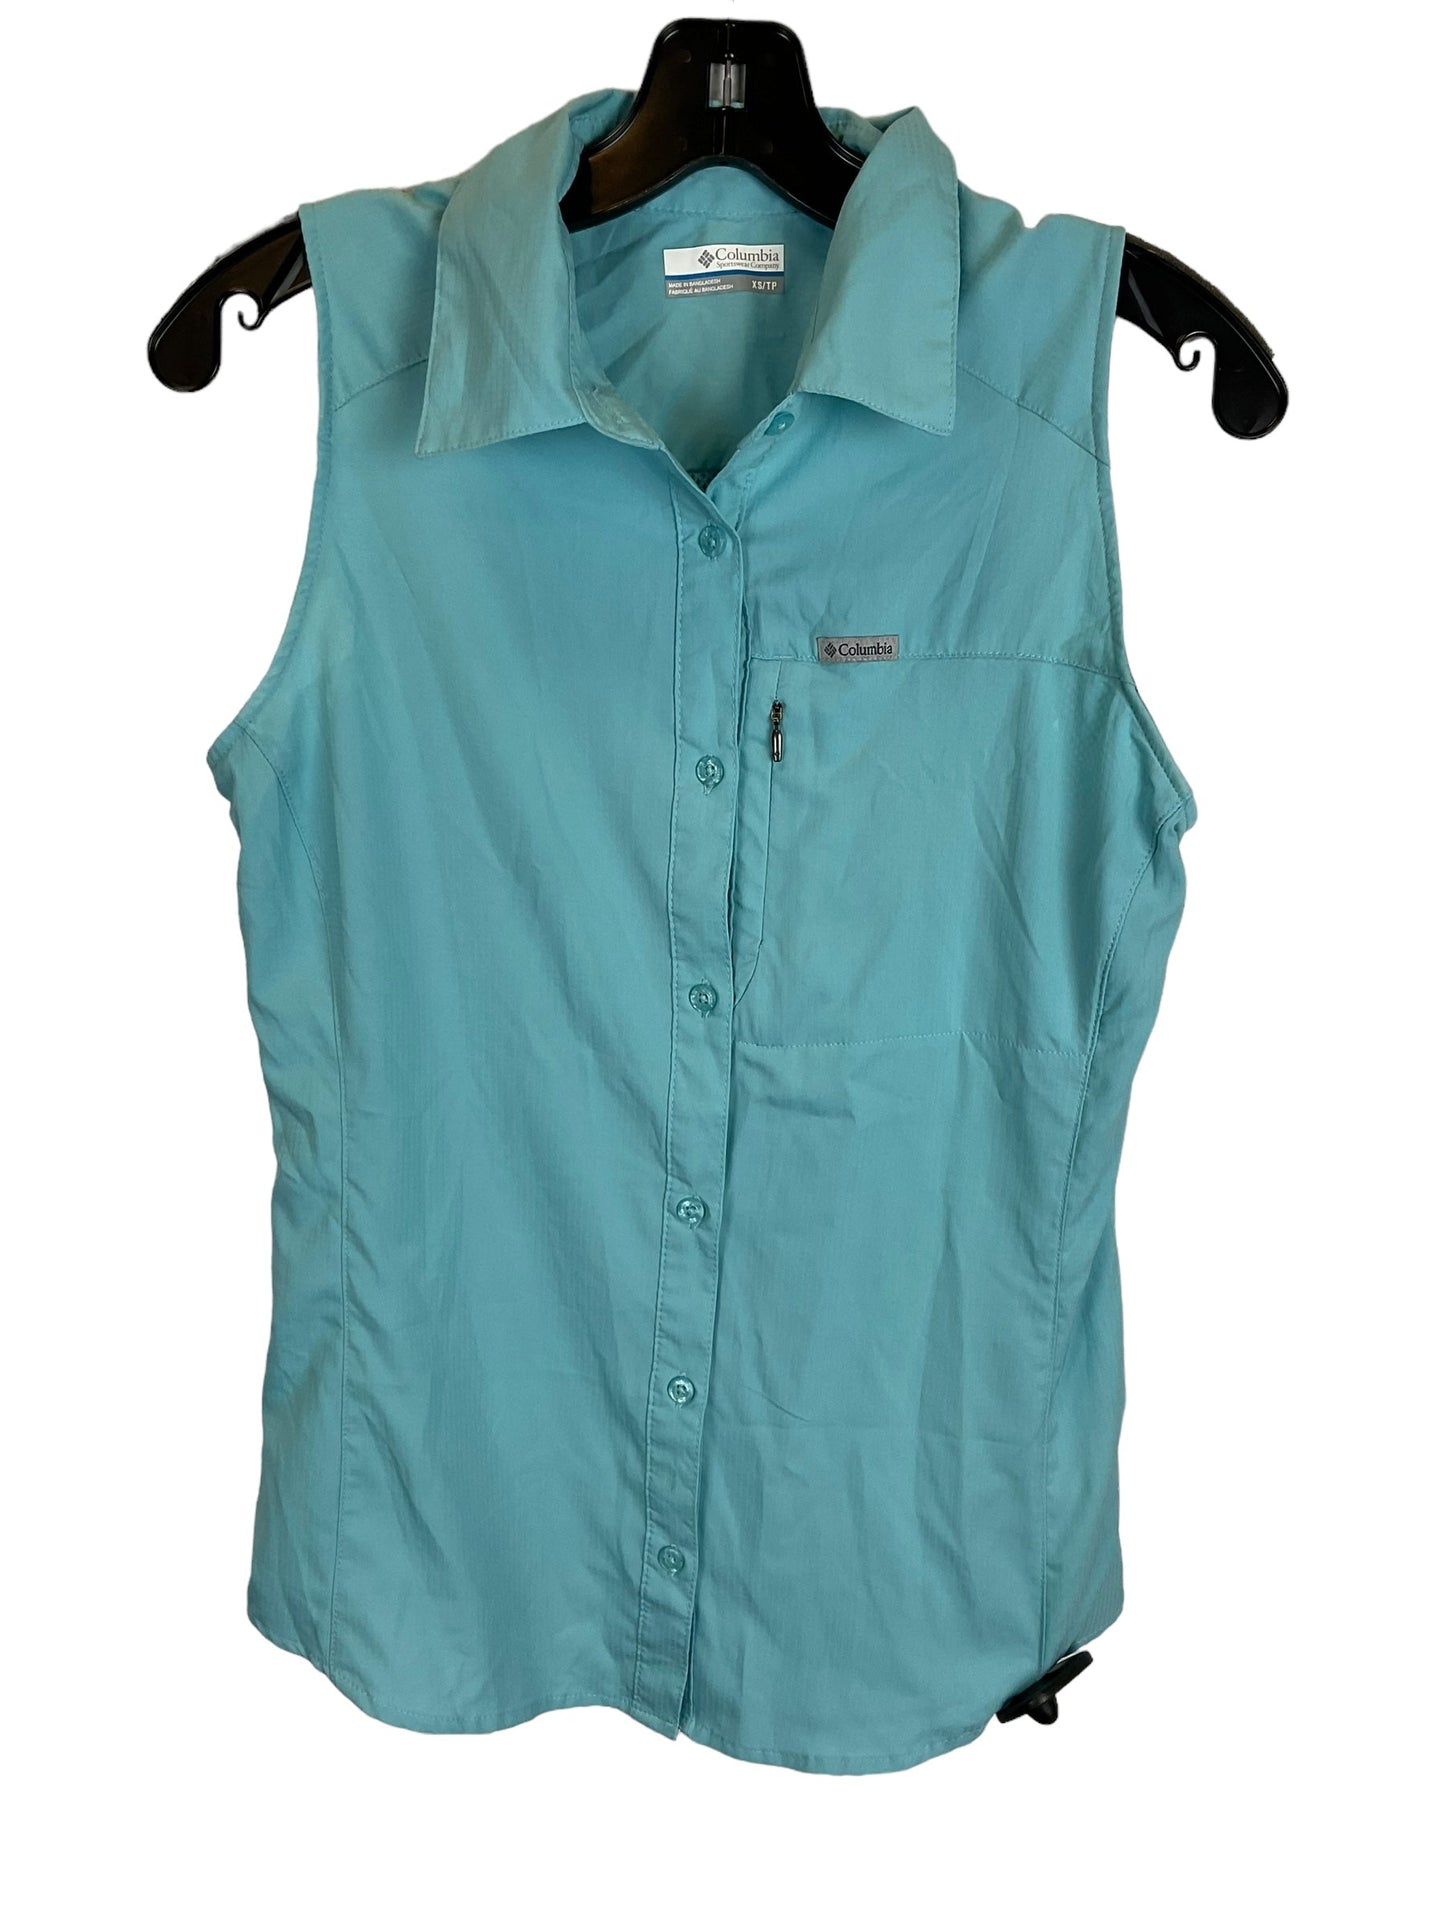 Blue Vest Other Columbia, Size Xs